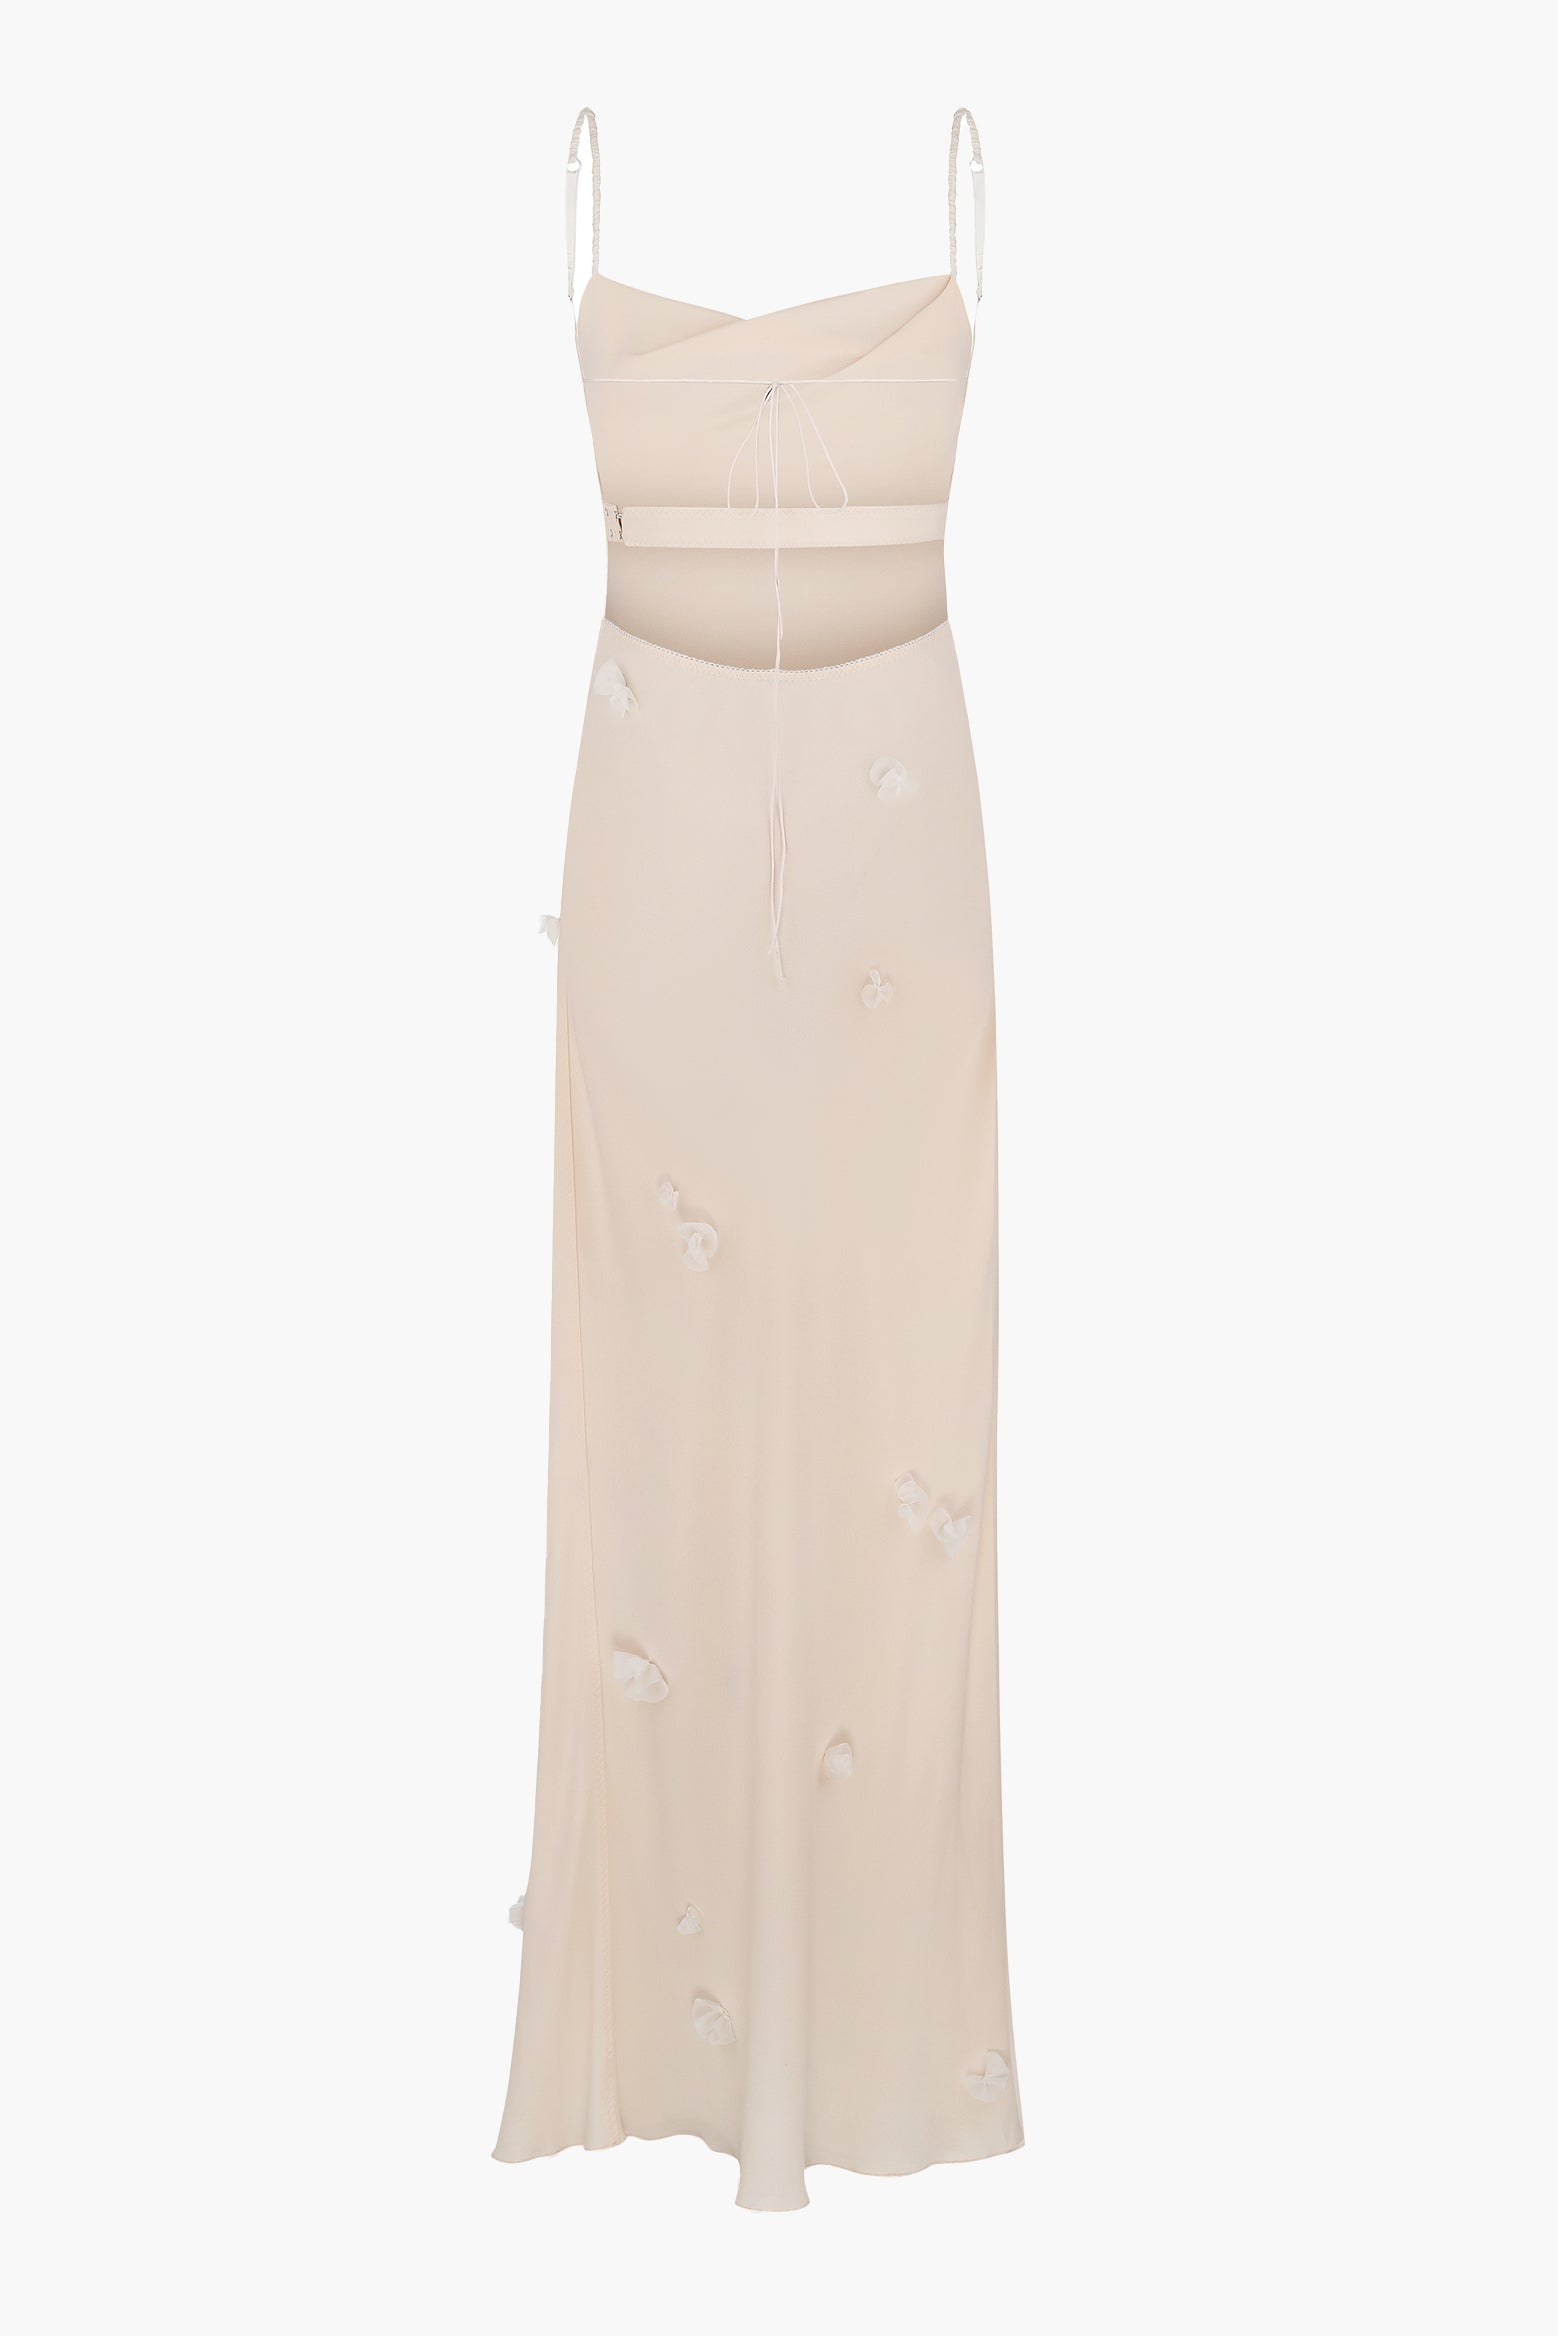 Anna October Faya Dress in Cream available at The New Trend Australia.